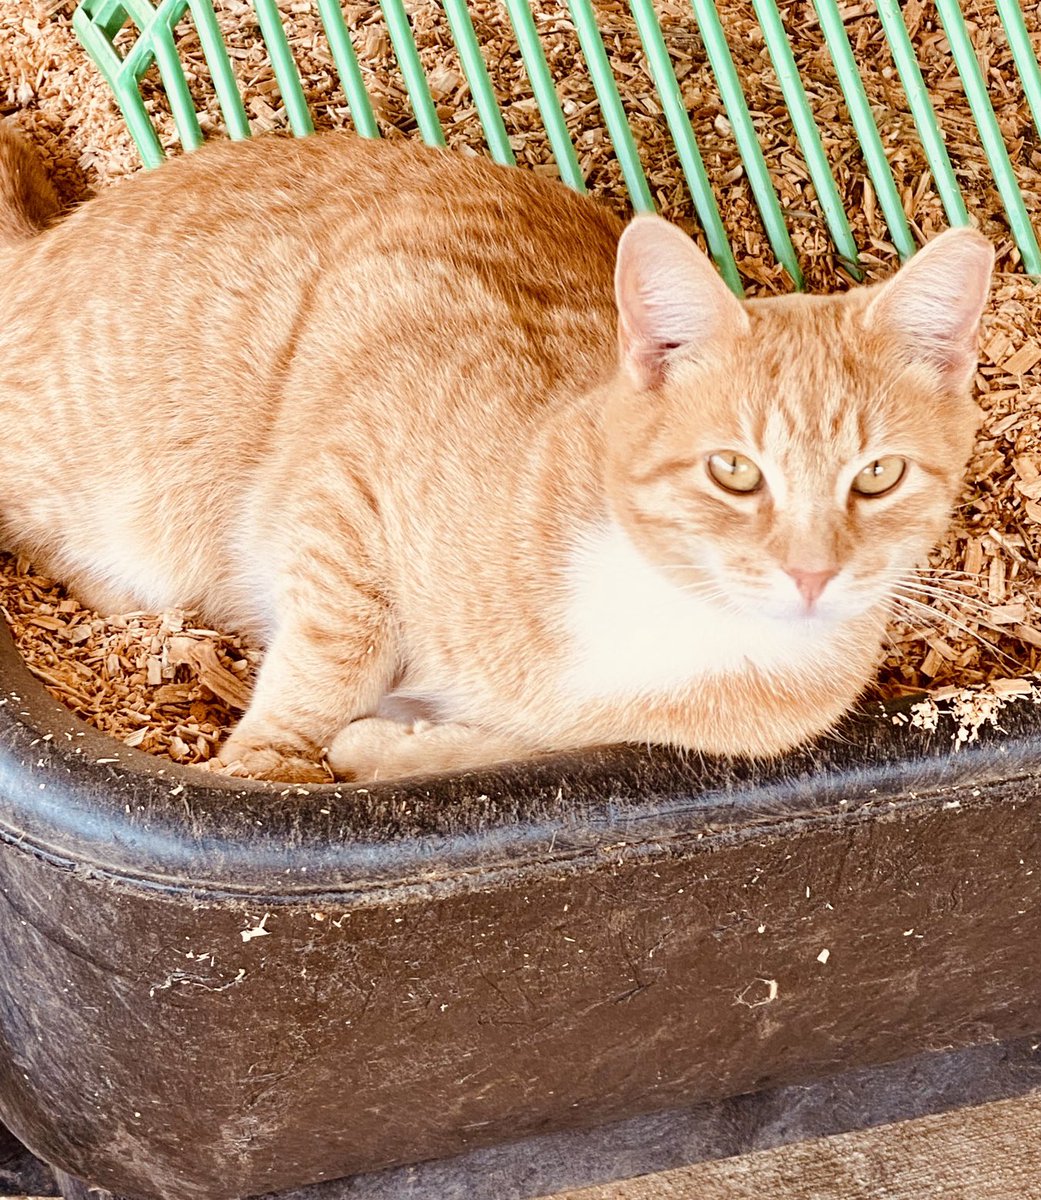 Happy Thankful Thursday! I’m grateful for my brother sending me pics from home like this one of Sir Caleb chilling in the cedar shavings.🤗🤗